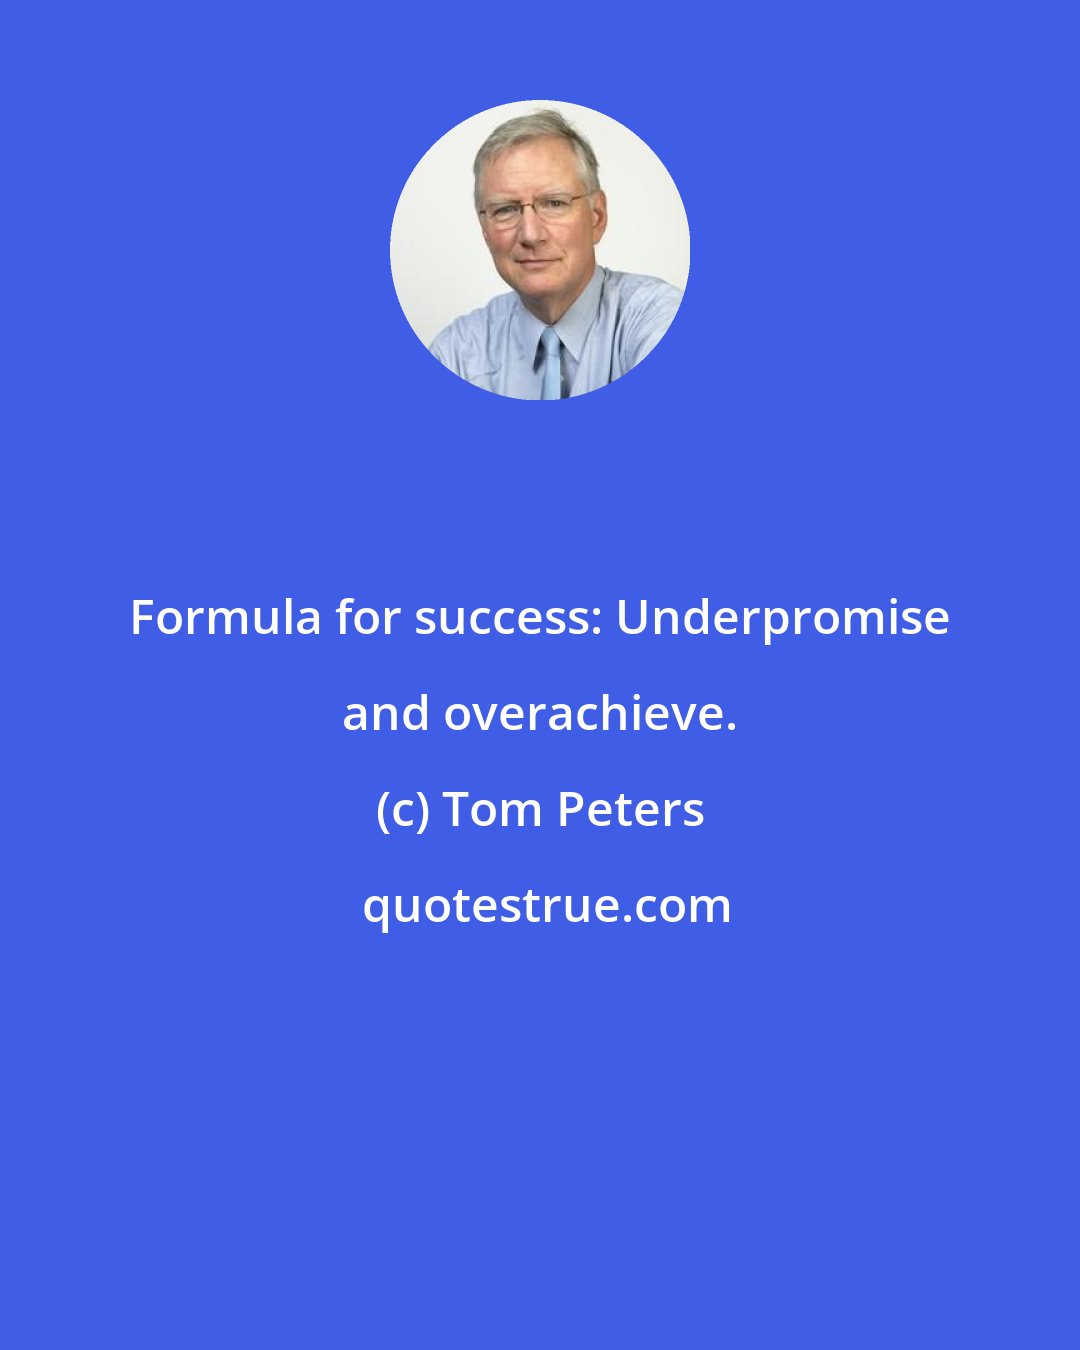 Tom Peters: Formula for success: Underpromise and overachieve.